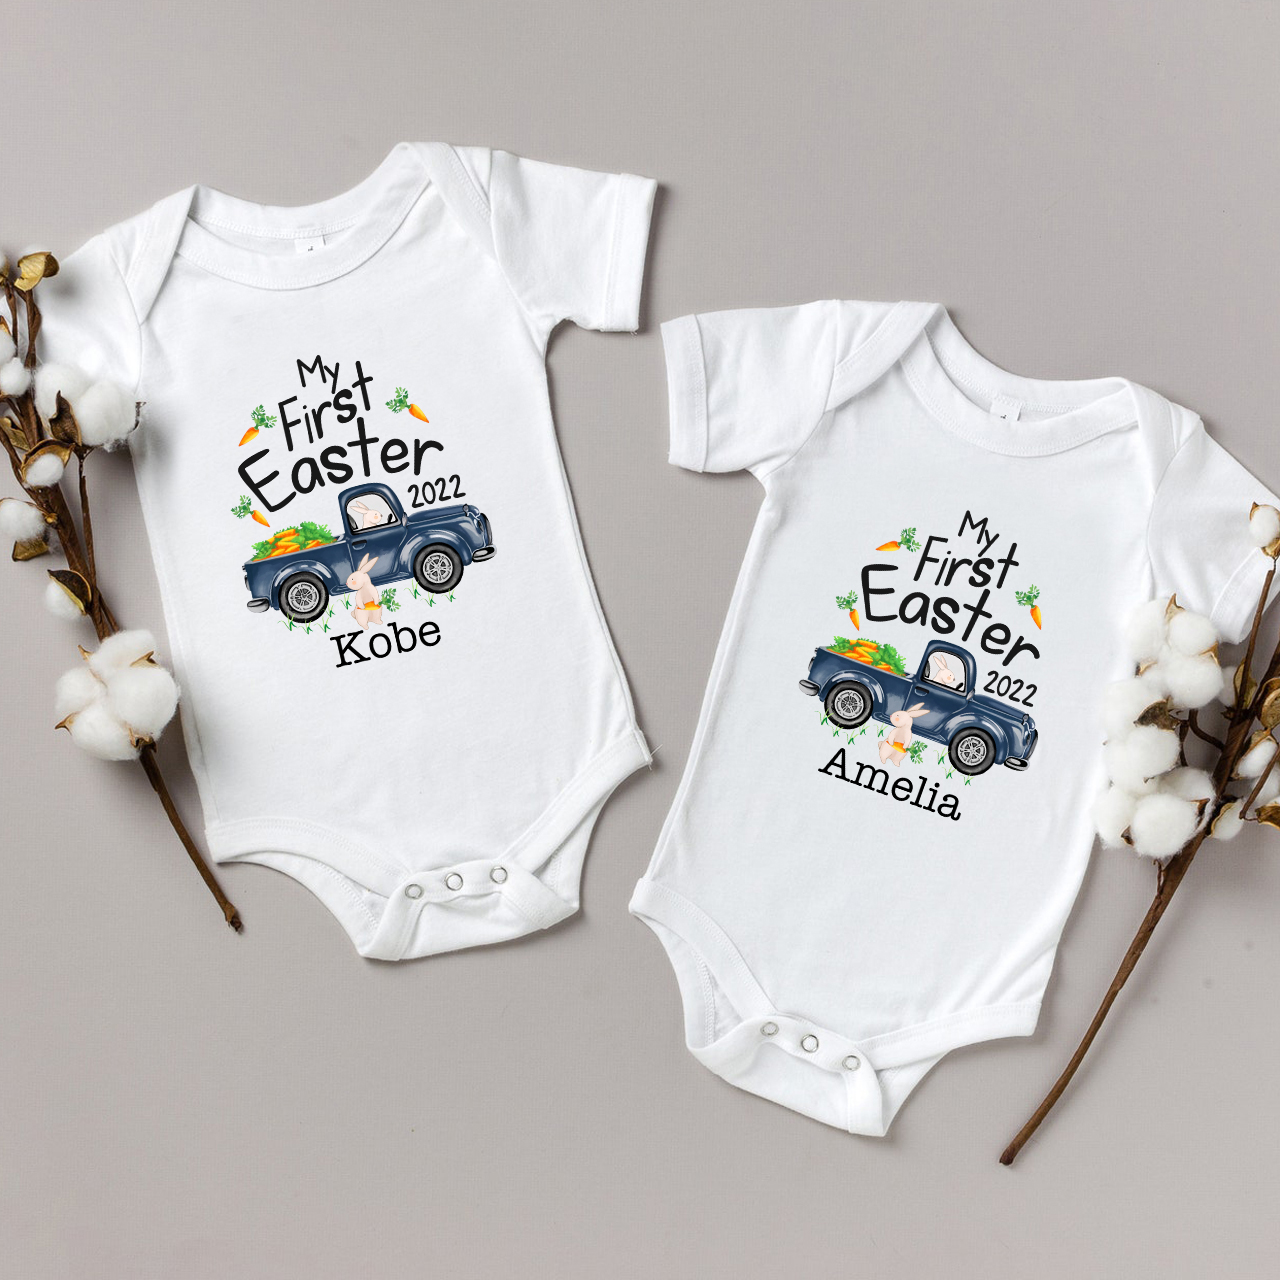 Personalized Baby Bodysuit & Shirts  (My First Easter)